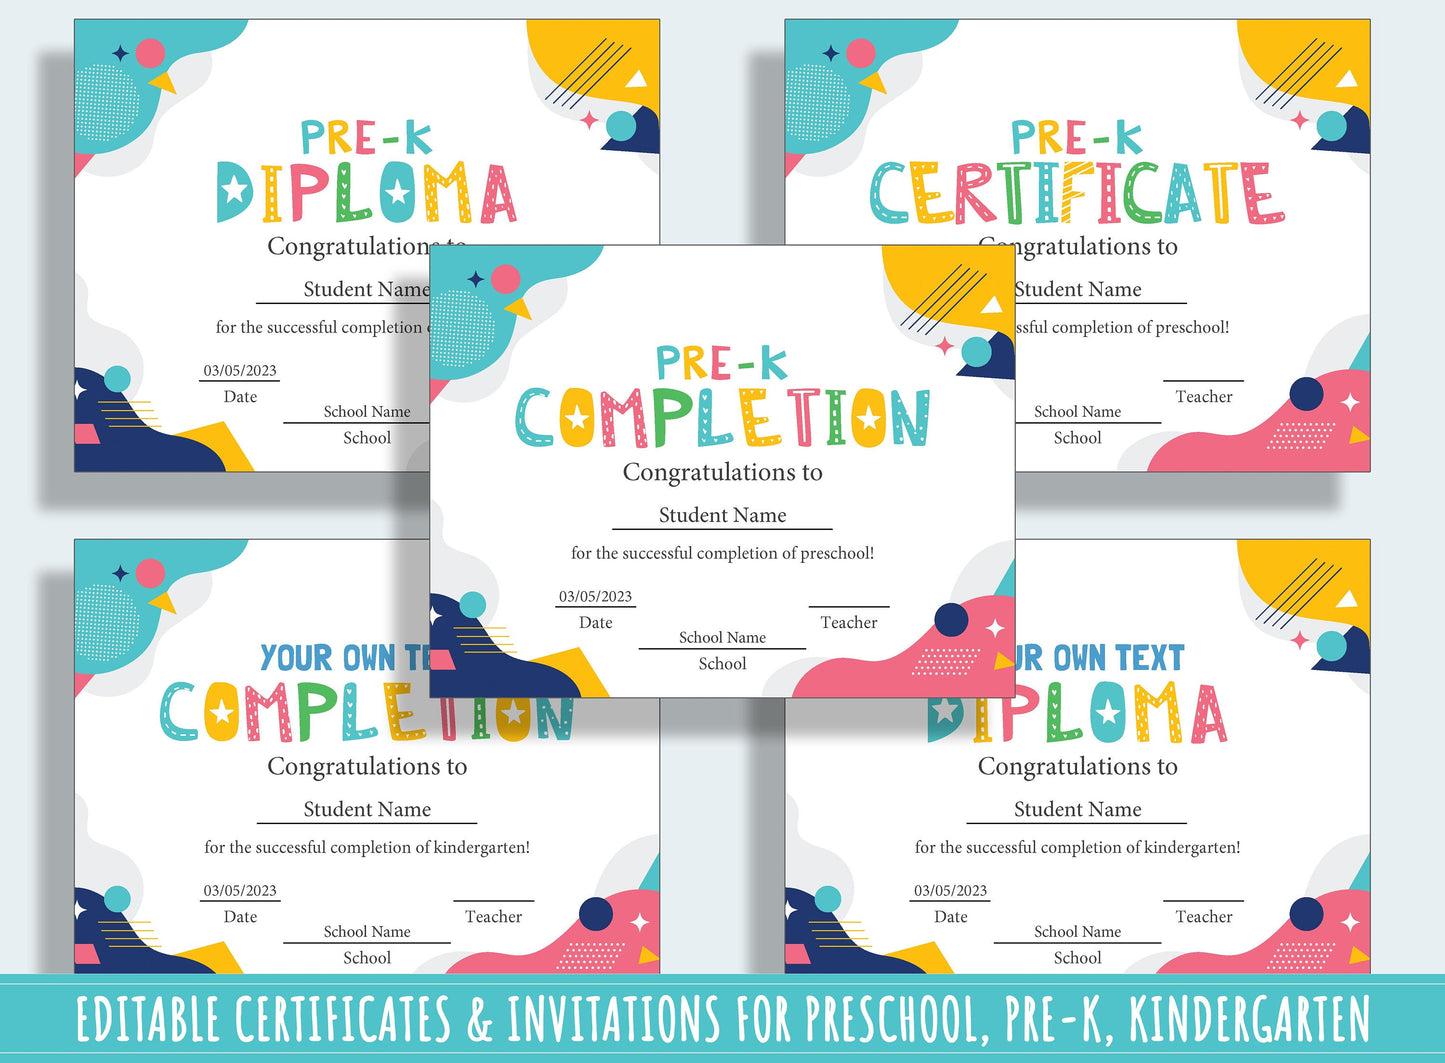 Diploma, Certificate, and Invitation Collection: 37 Editable Pages for Preschool and Kindergarten Graduation, PDF File, Instant Download